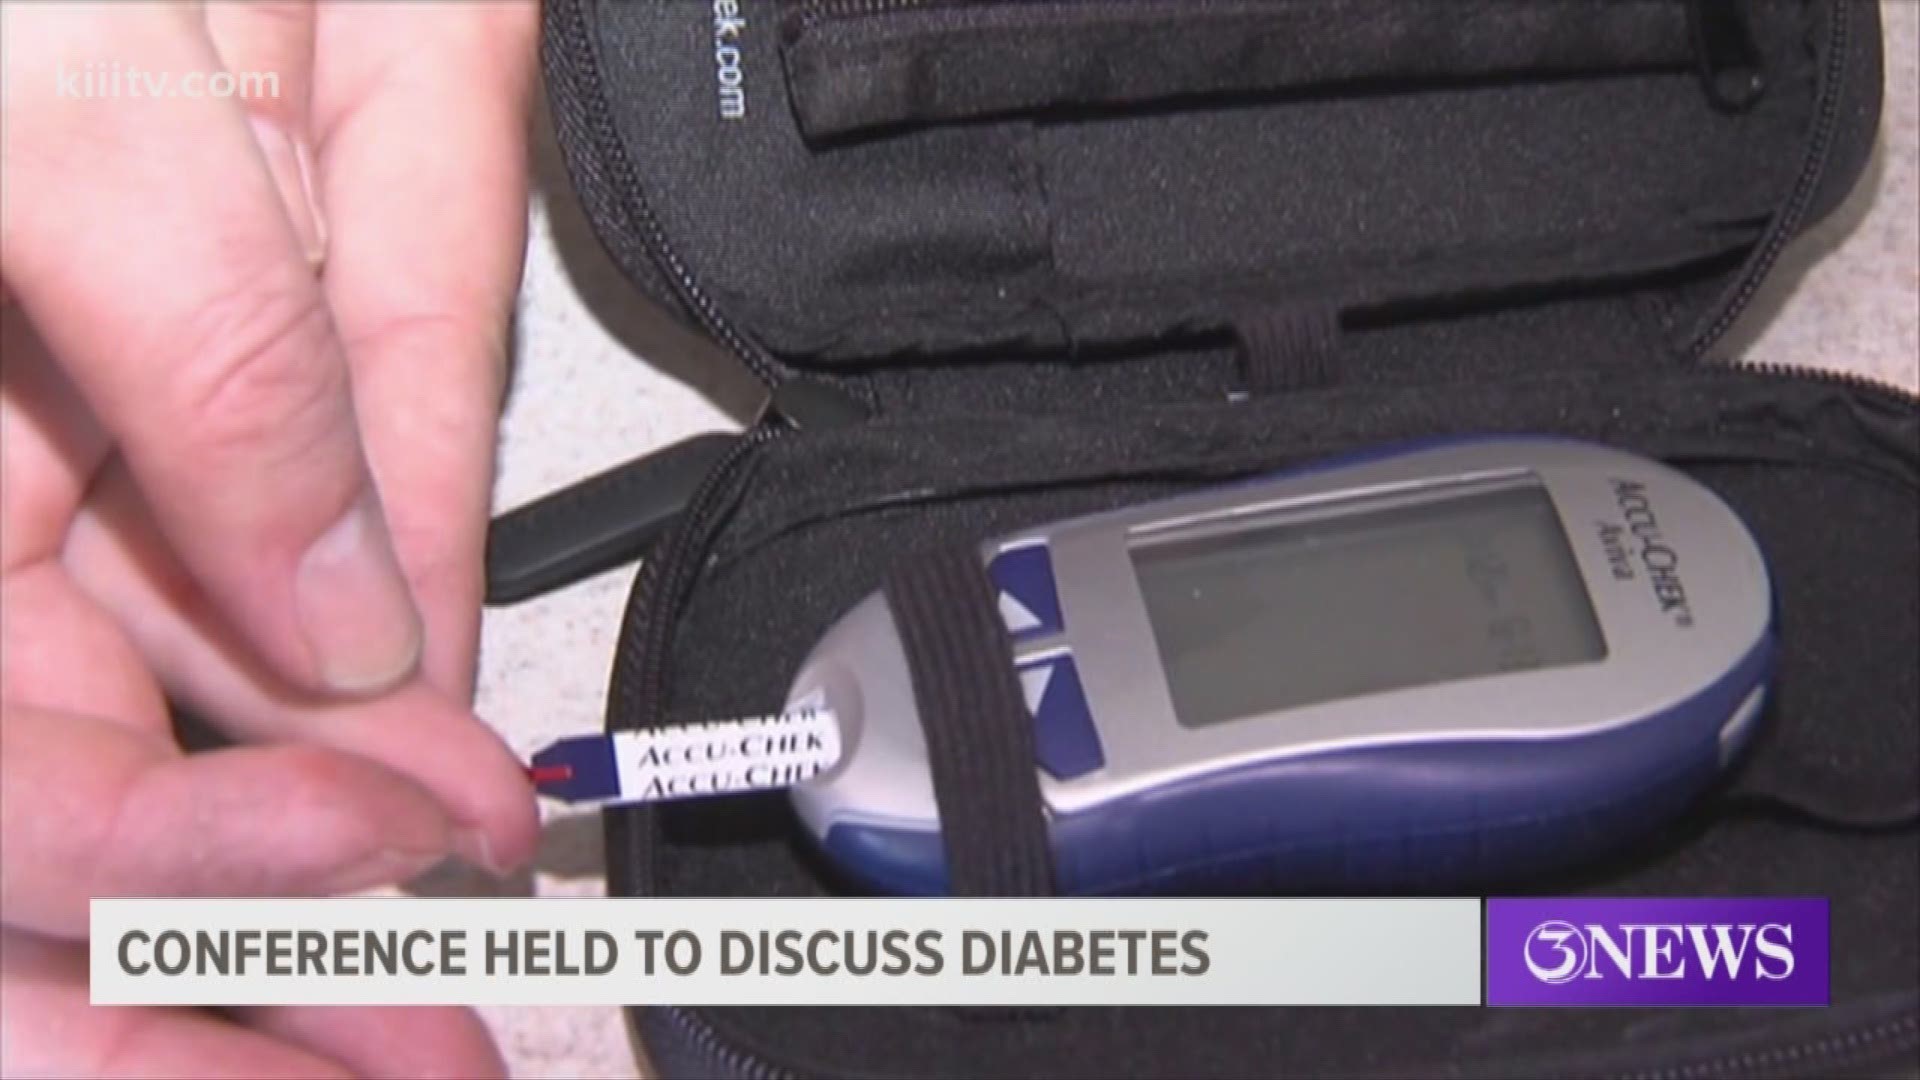 Finding ways to help people deal with diabetes